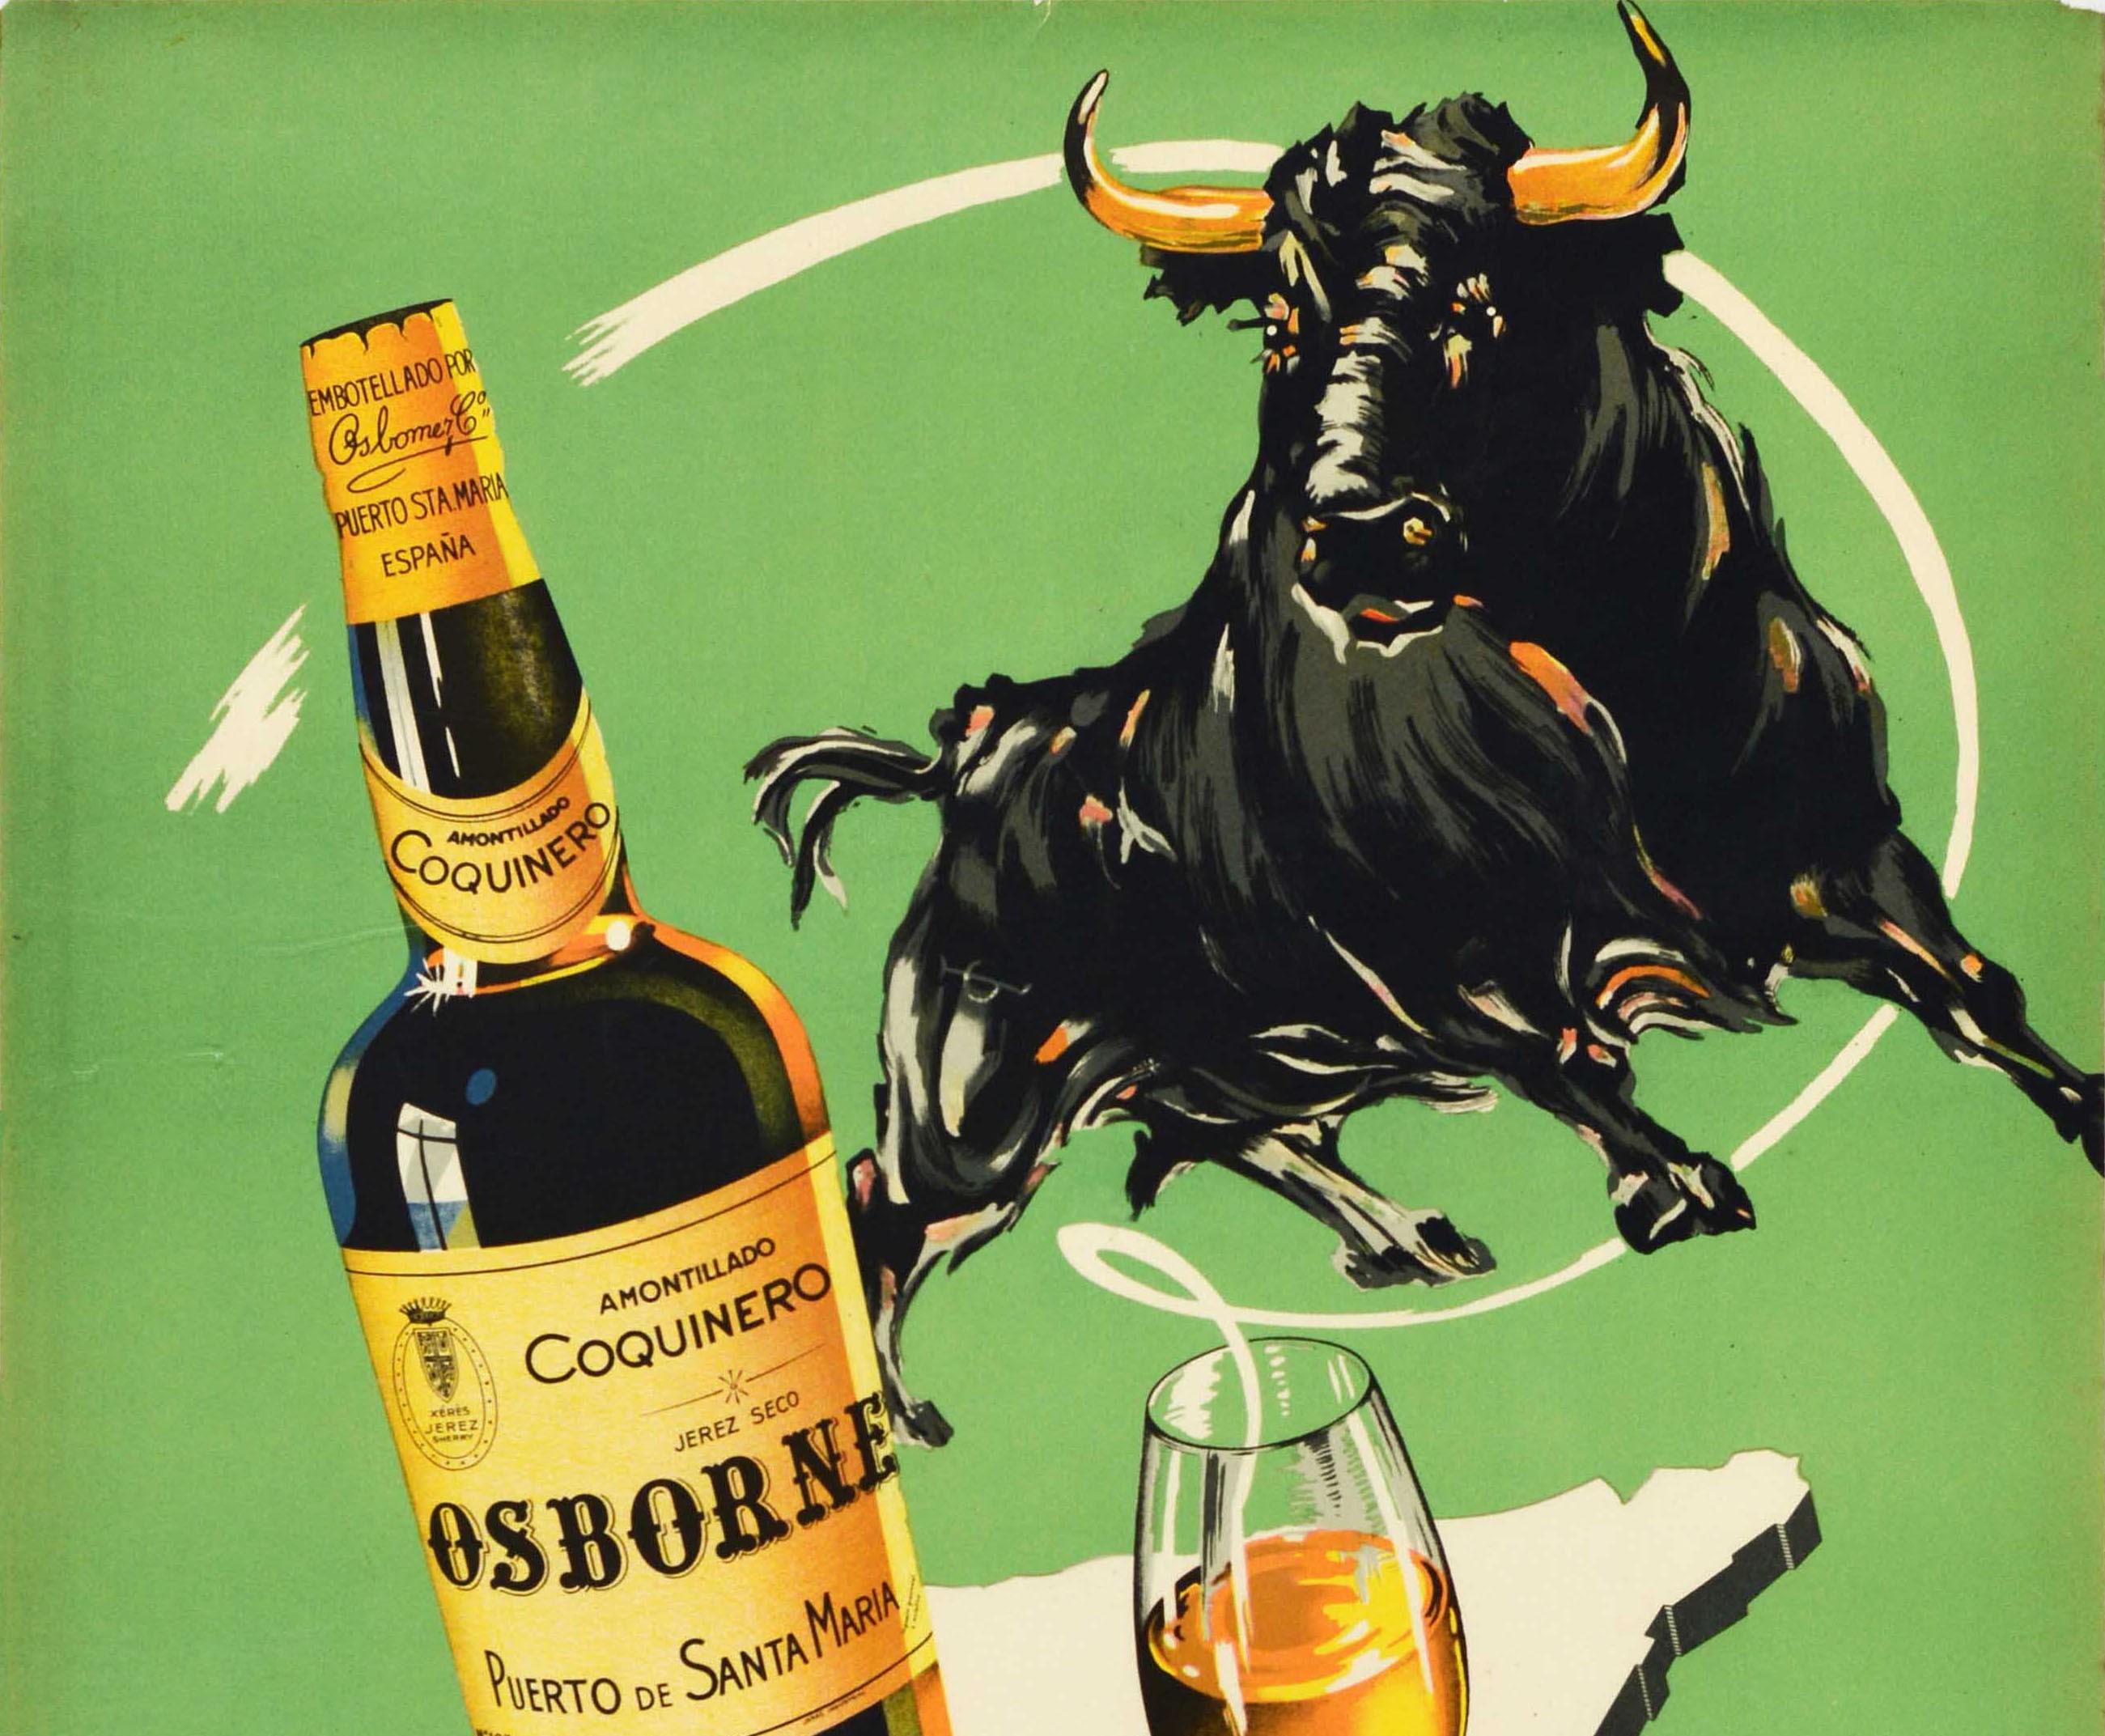 Original vintage drink advertising poster for Amontillado Coquinero Osborne Sherry / Xeres / Jerez Puerto de Santa Maria Espana featuring a great design depicting a bull above a bottle of the sherry wine next to a glass on an outline of the map of